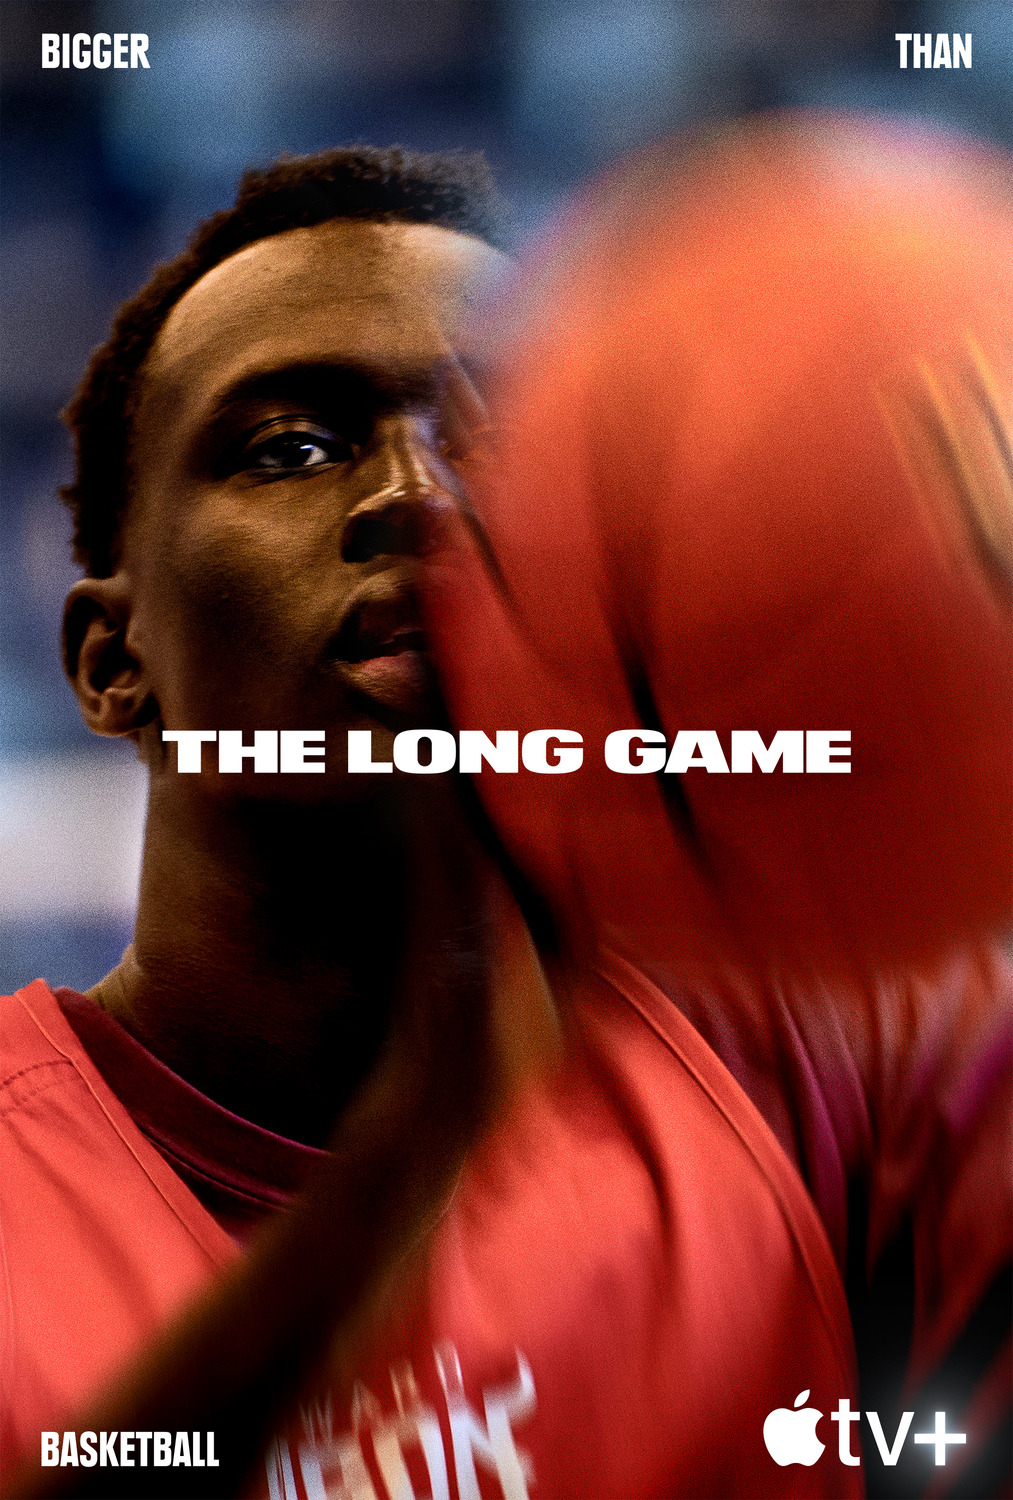 Extra Large TV Poster Image for The Long Game: Bigger Than Basketball 